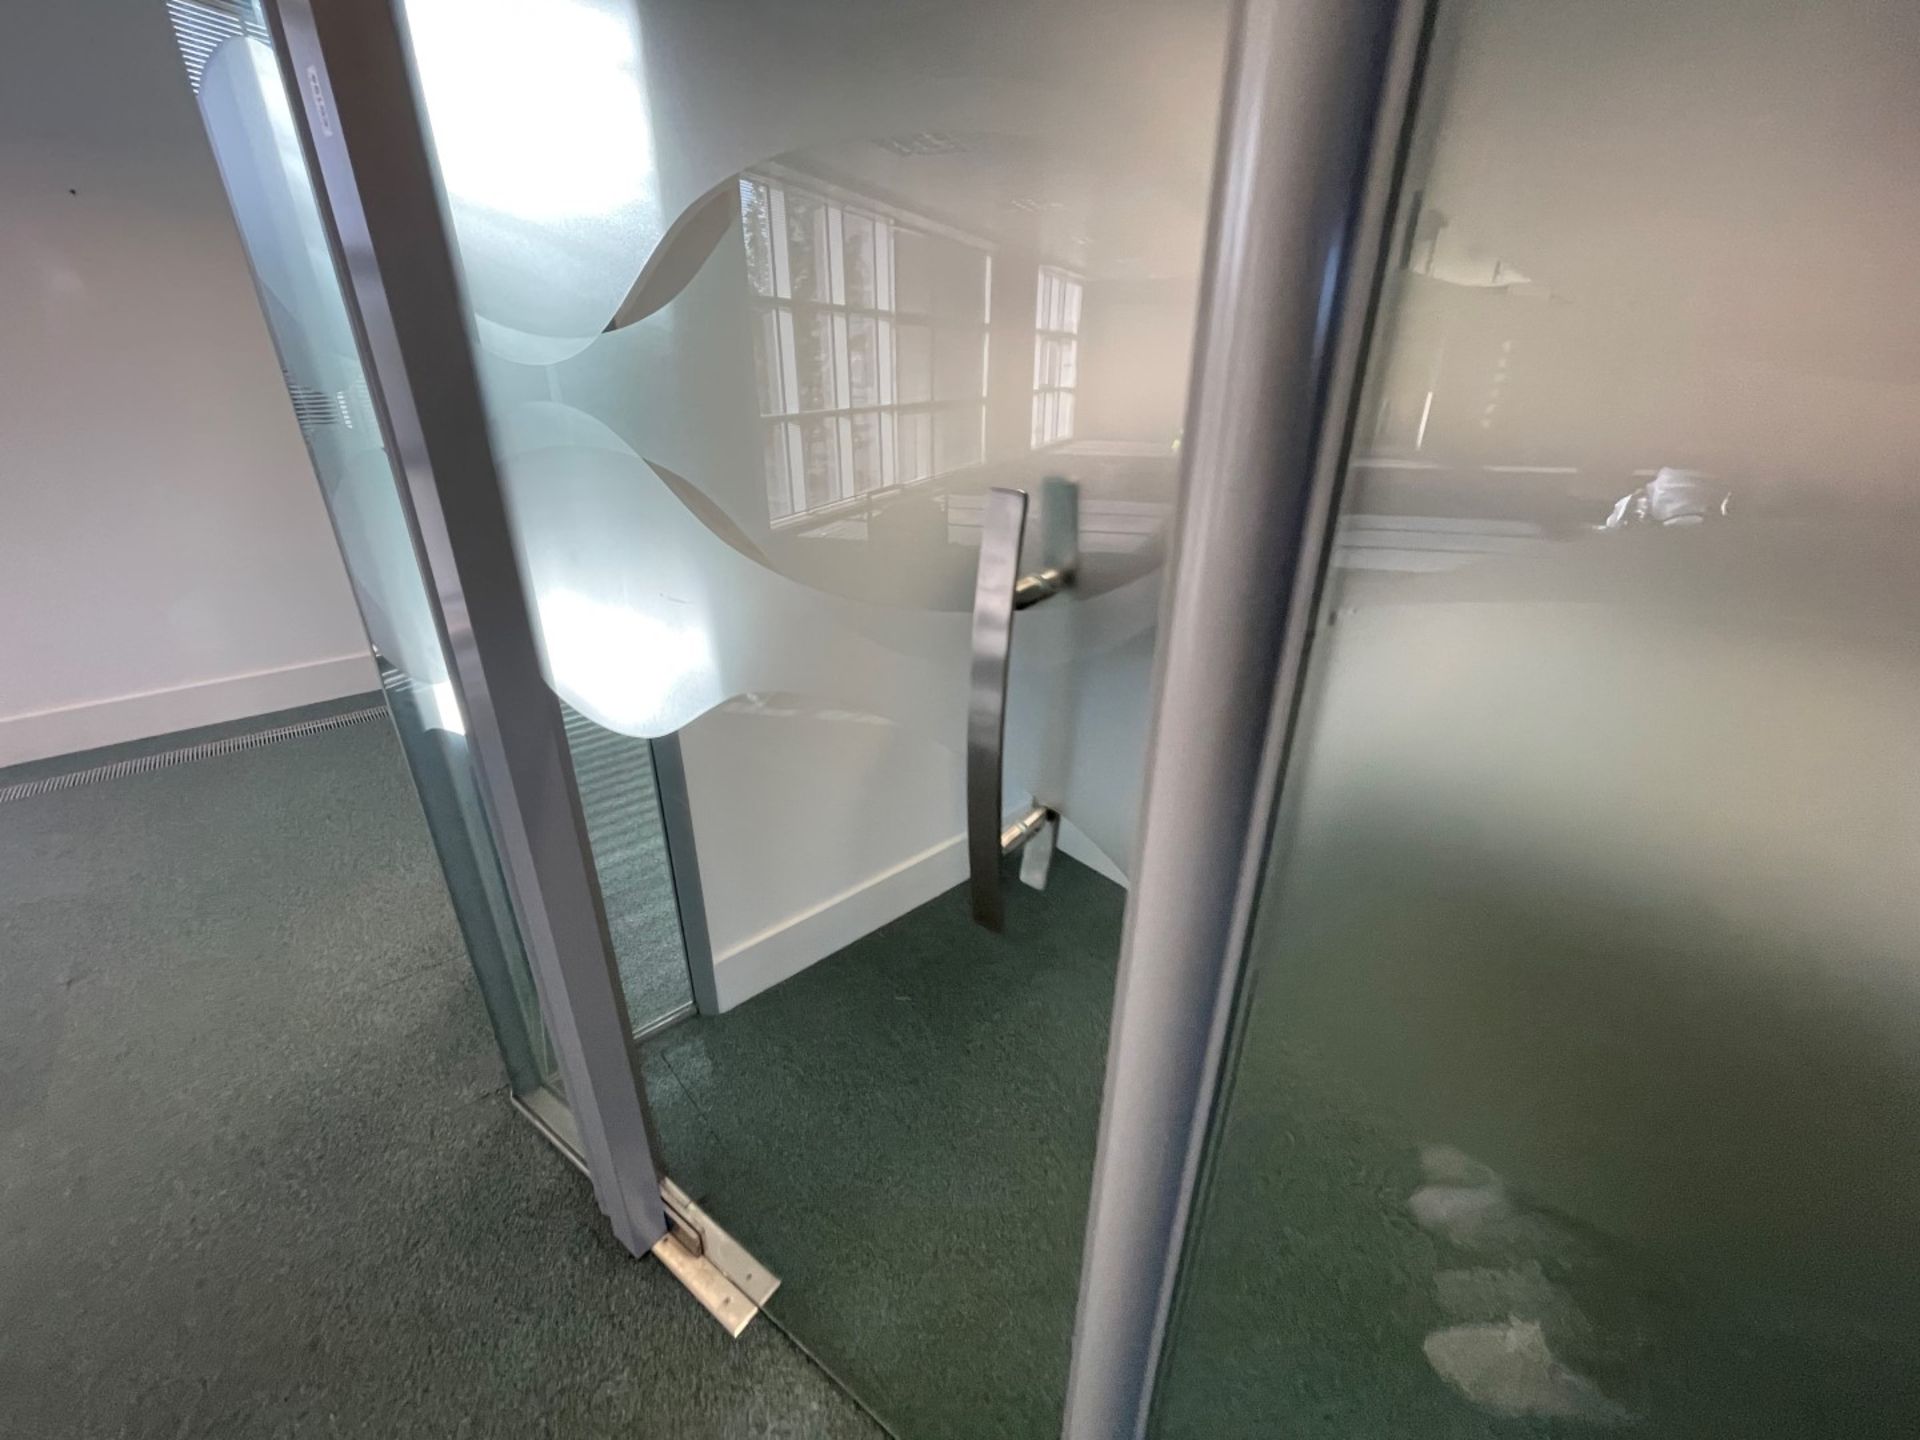 9 x Assorted Glass Office Dividers Panels With 2 x Glass Doors - Currently Covering 2 Offices - Image 6 of 11